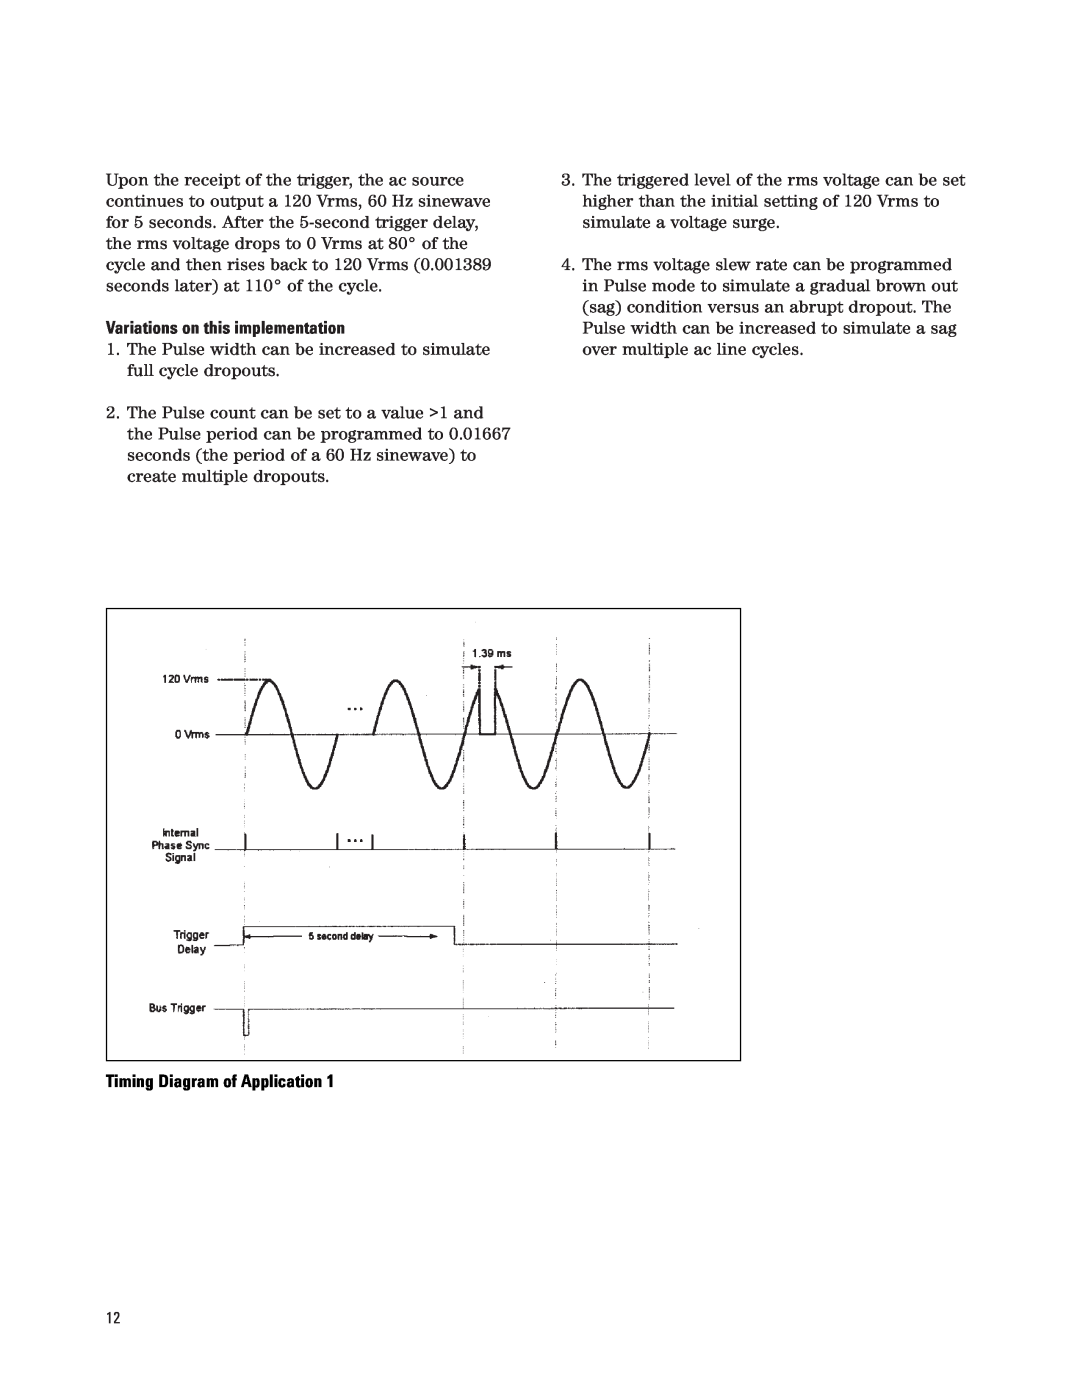 Agilent Technologies 6800 manual Variations on this implementation, Timing Diagram of Application 